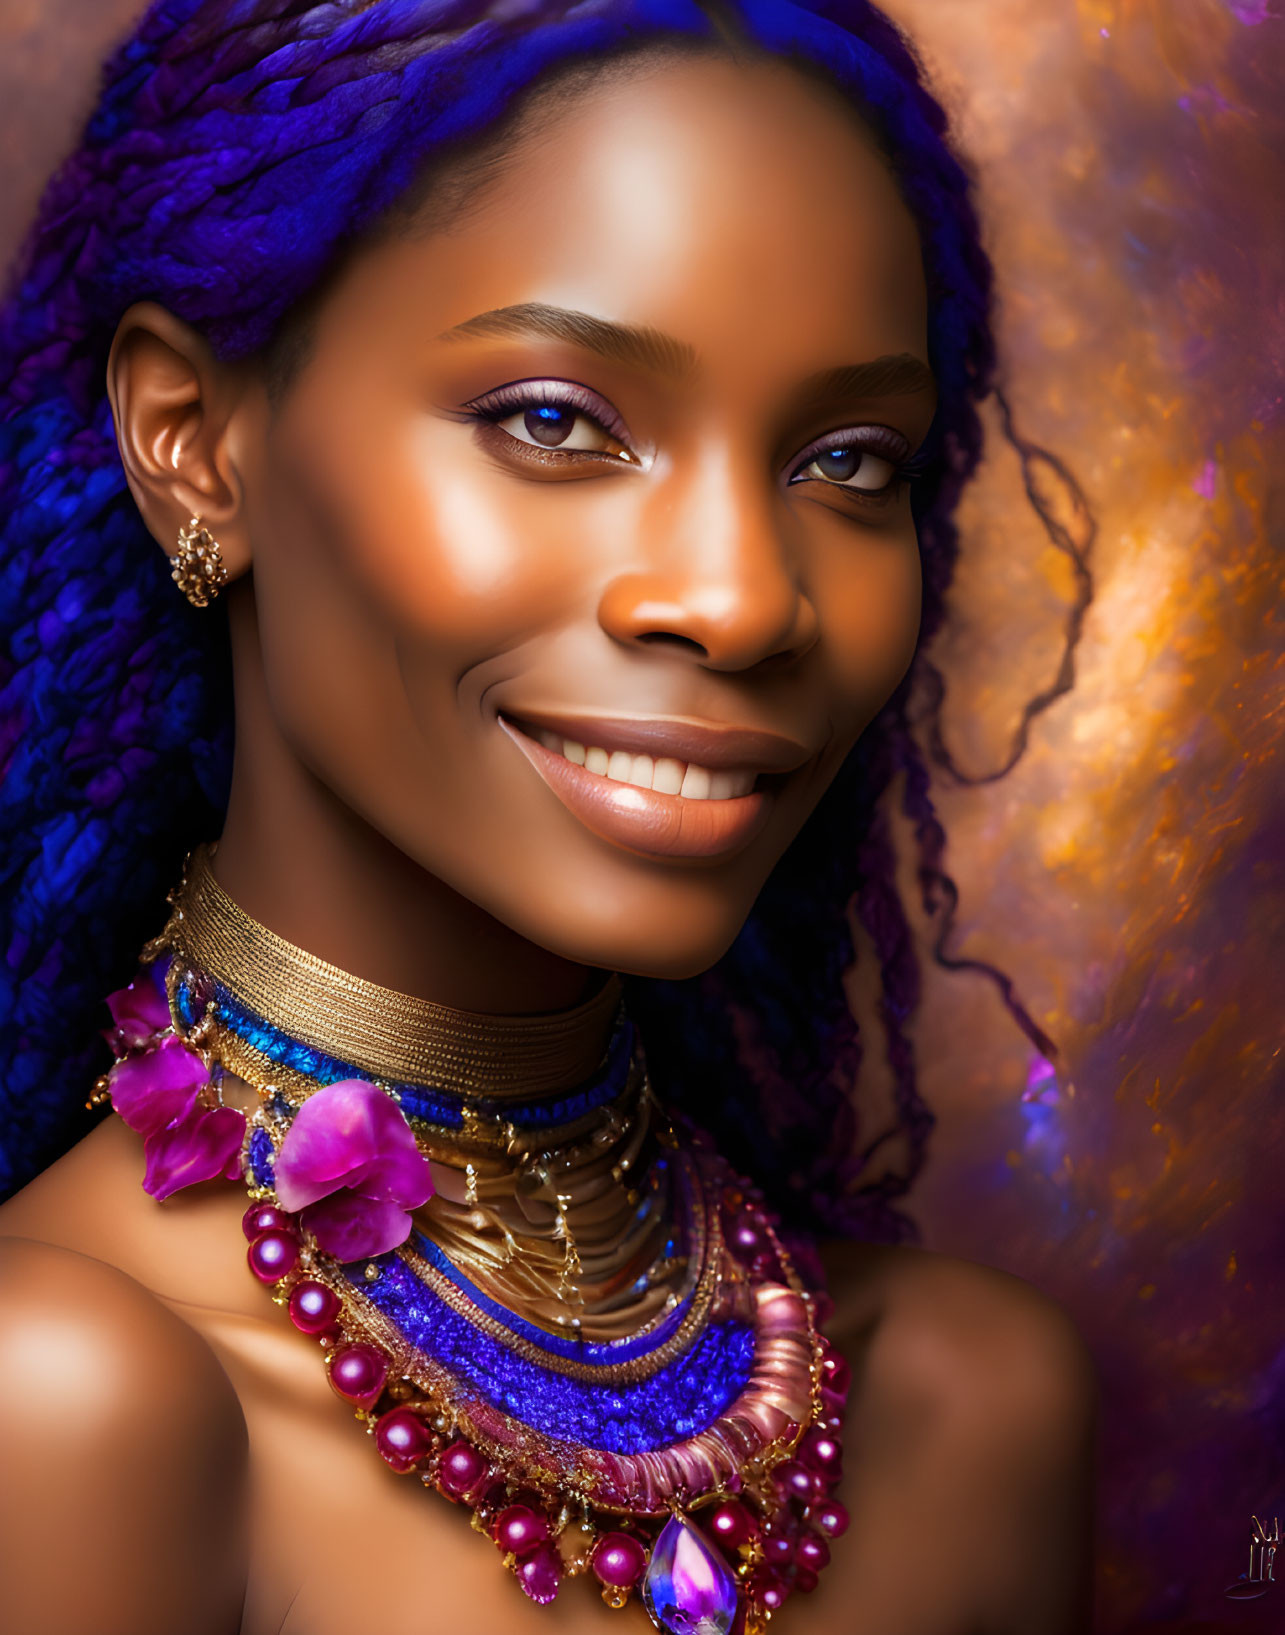 Colorful portrait of a woman with blue hair and vibrant skin against abstract backdrop